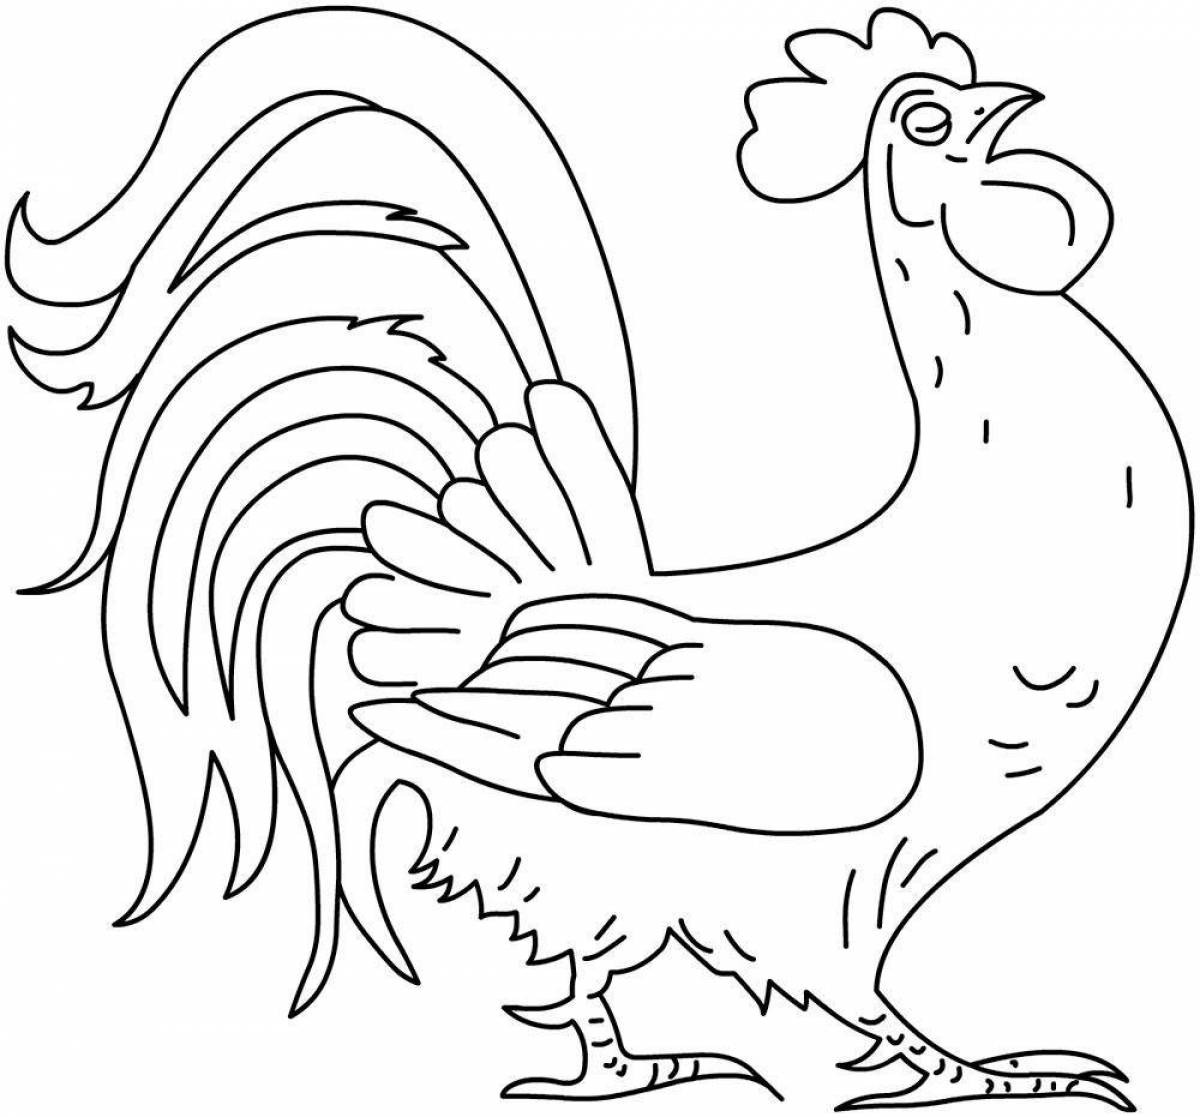 Coloring rooster for children 4-5 years old